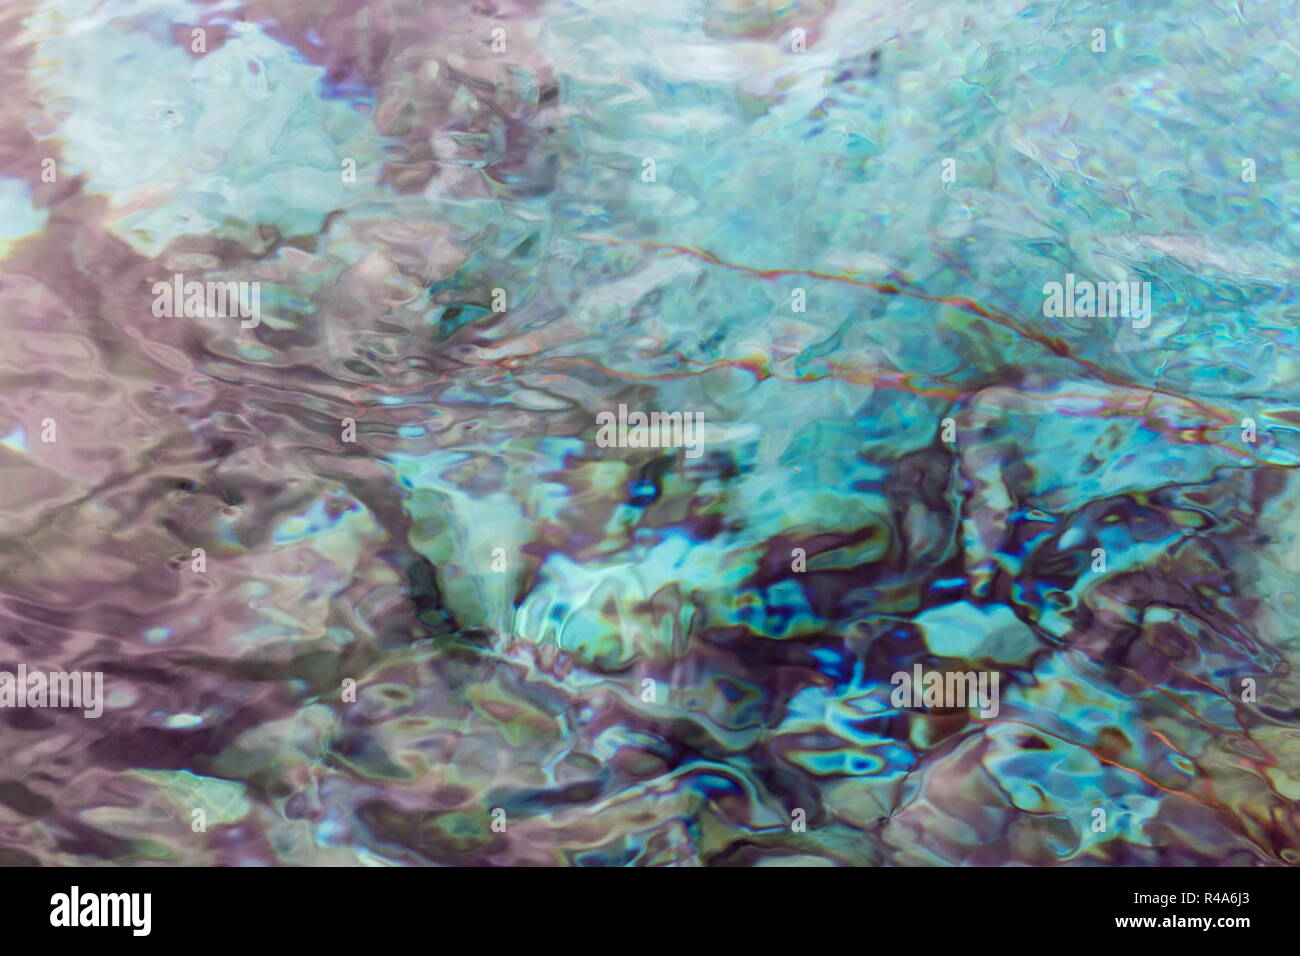 Abstract nature background image of the clear fresh water of Waikoropupu Springs, New Zealand. Stock Photo